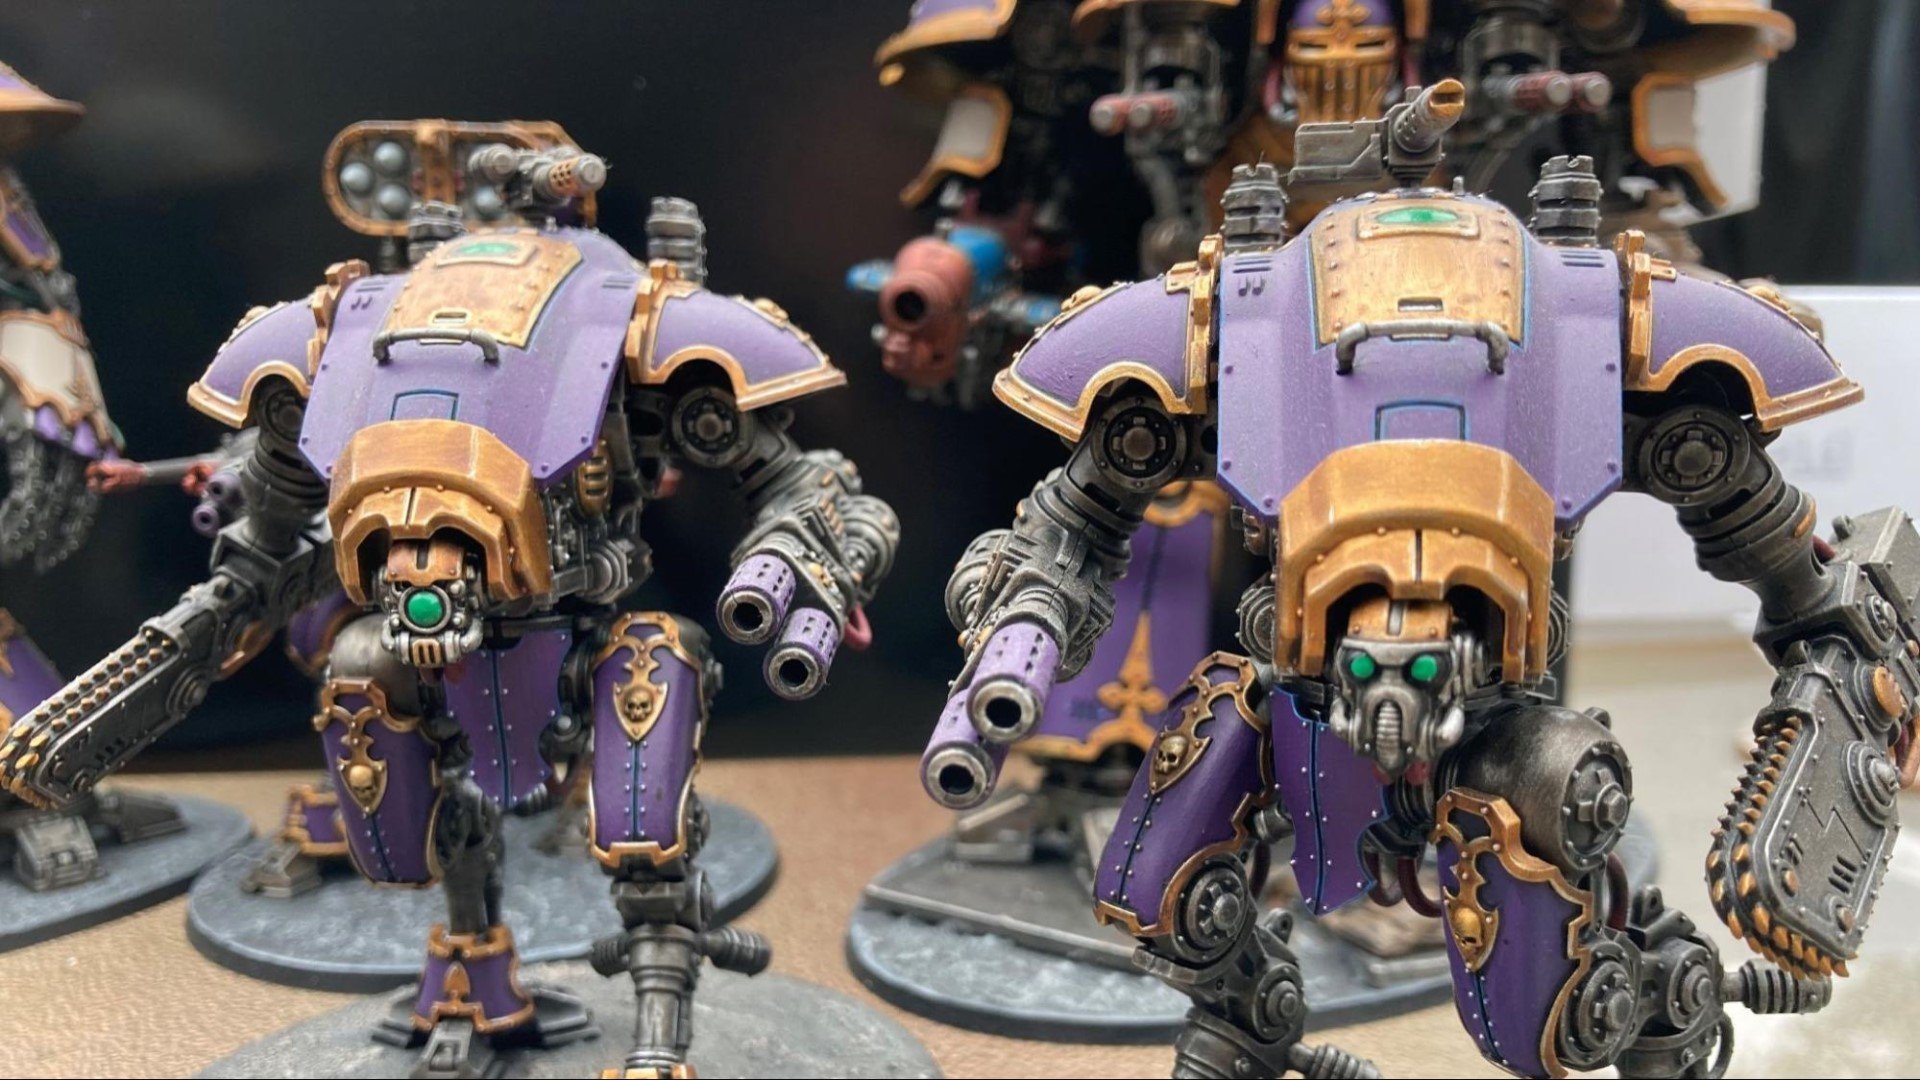 Warhammer 40k Imperial Knights army guide - Photo provided to the author by Alan Bailey showing two Imperial Knight armigers in a purple and gold paint scheme